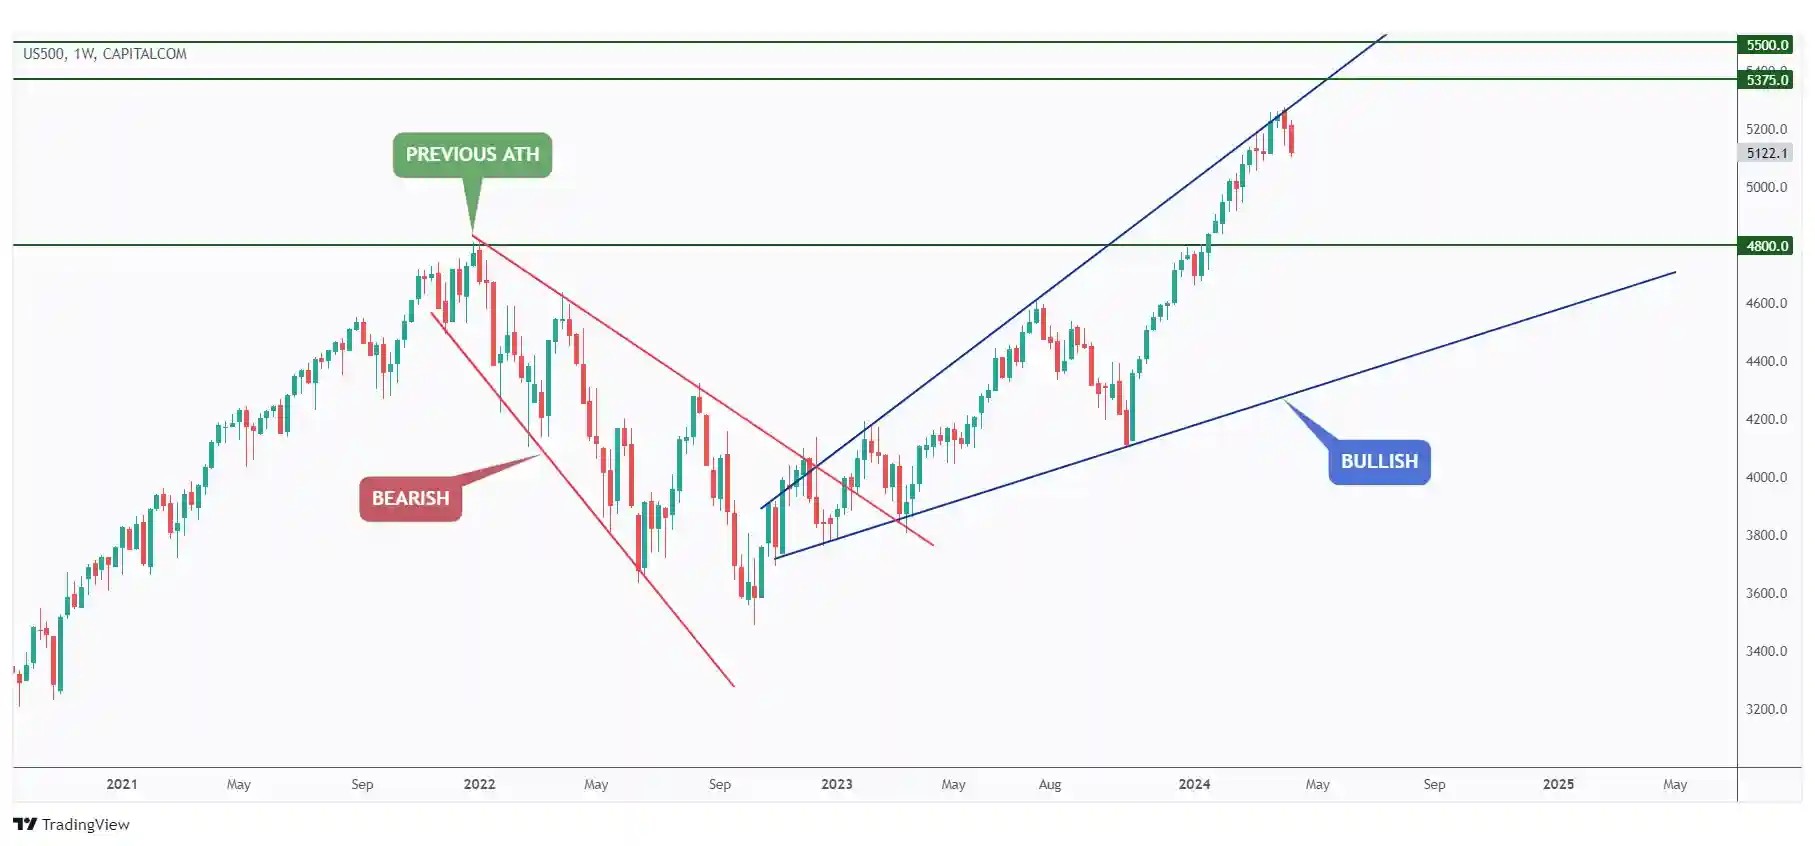 US500 weekly chart rejecting the upper bound of the wedge pattern showing the bears are finally pushing.